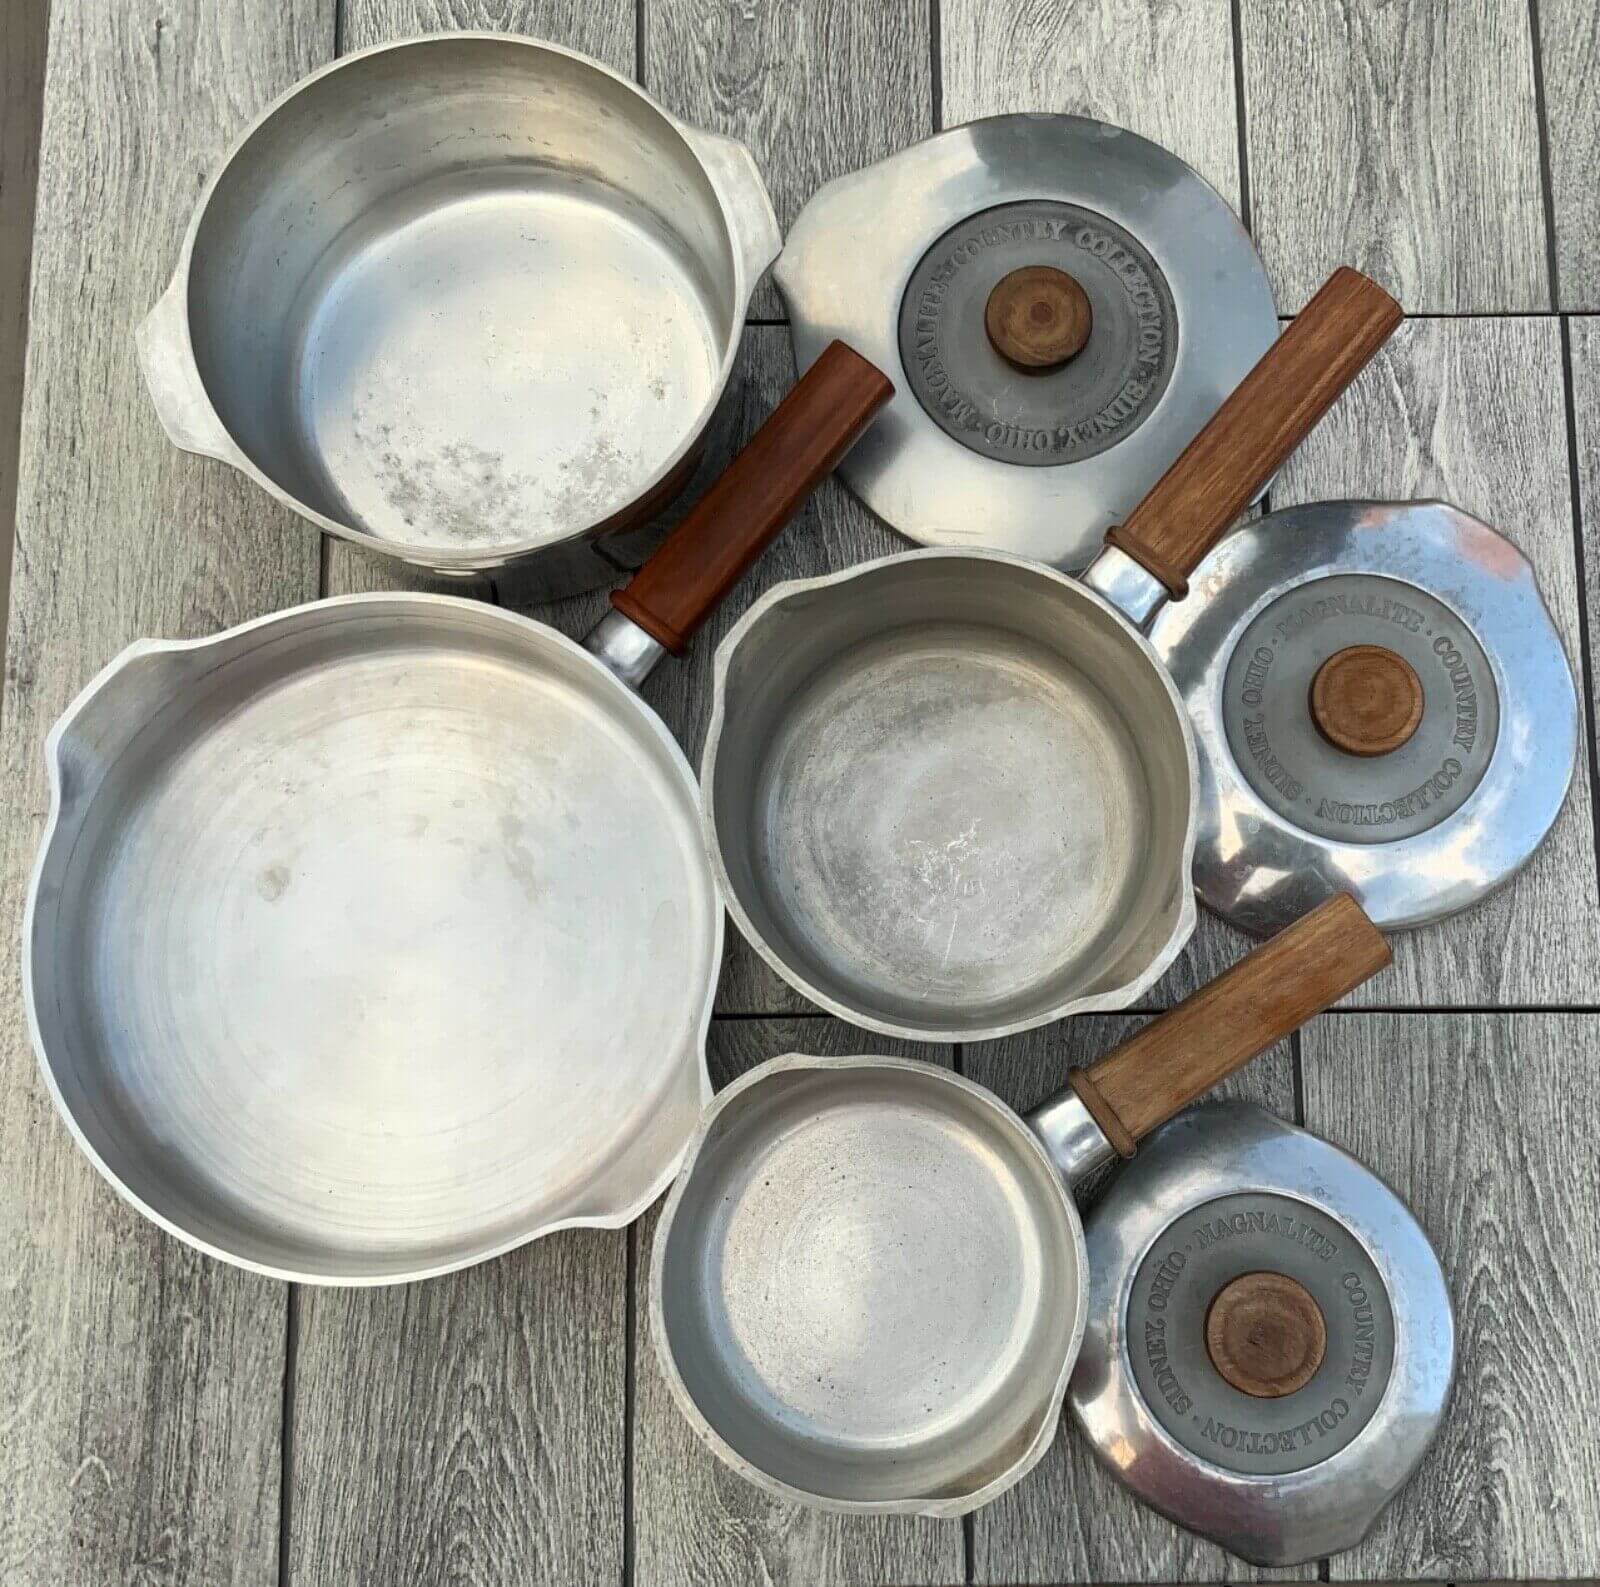 Wagner Ware Magnalite cookware set